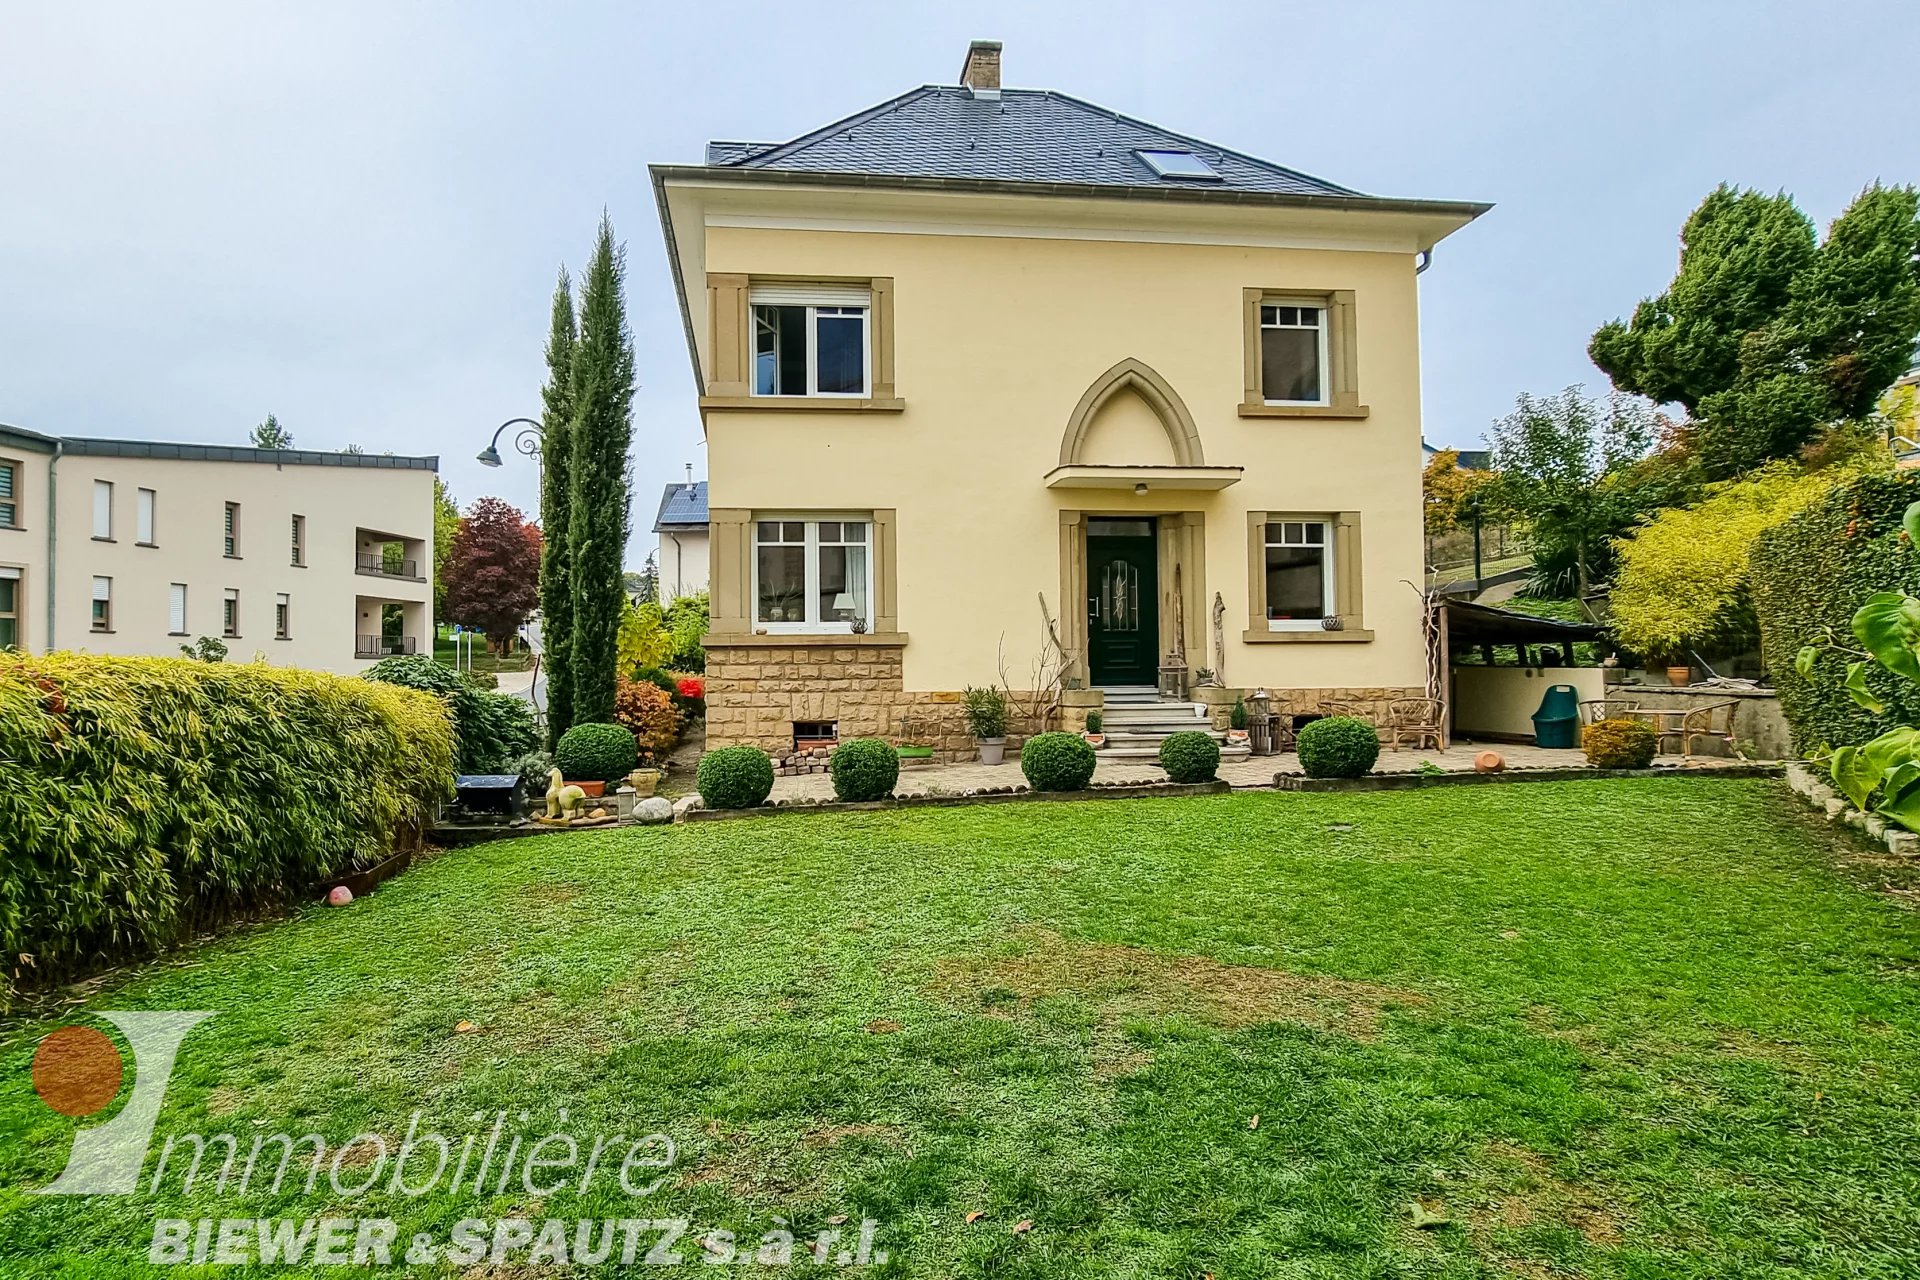 FOR SALE - House (former presbytery) with 3 bedrooms in Berbourg